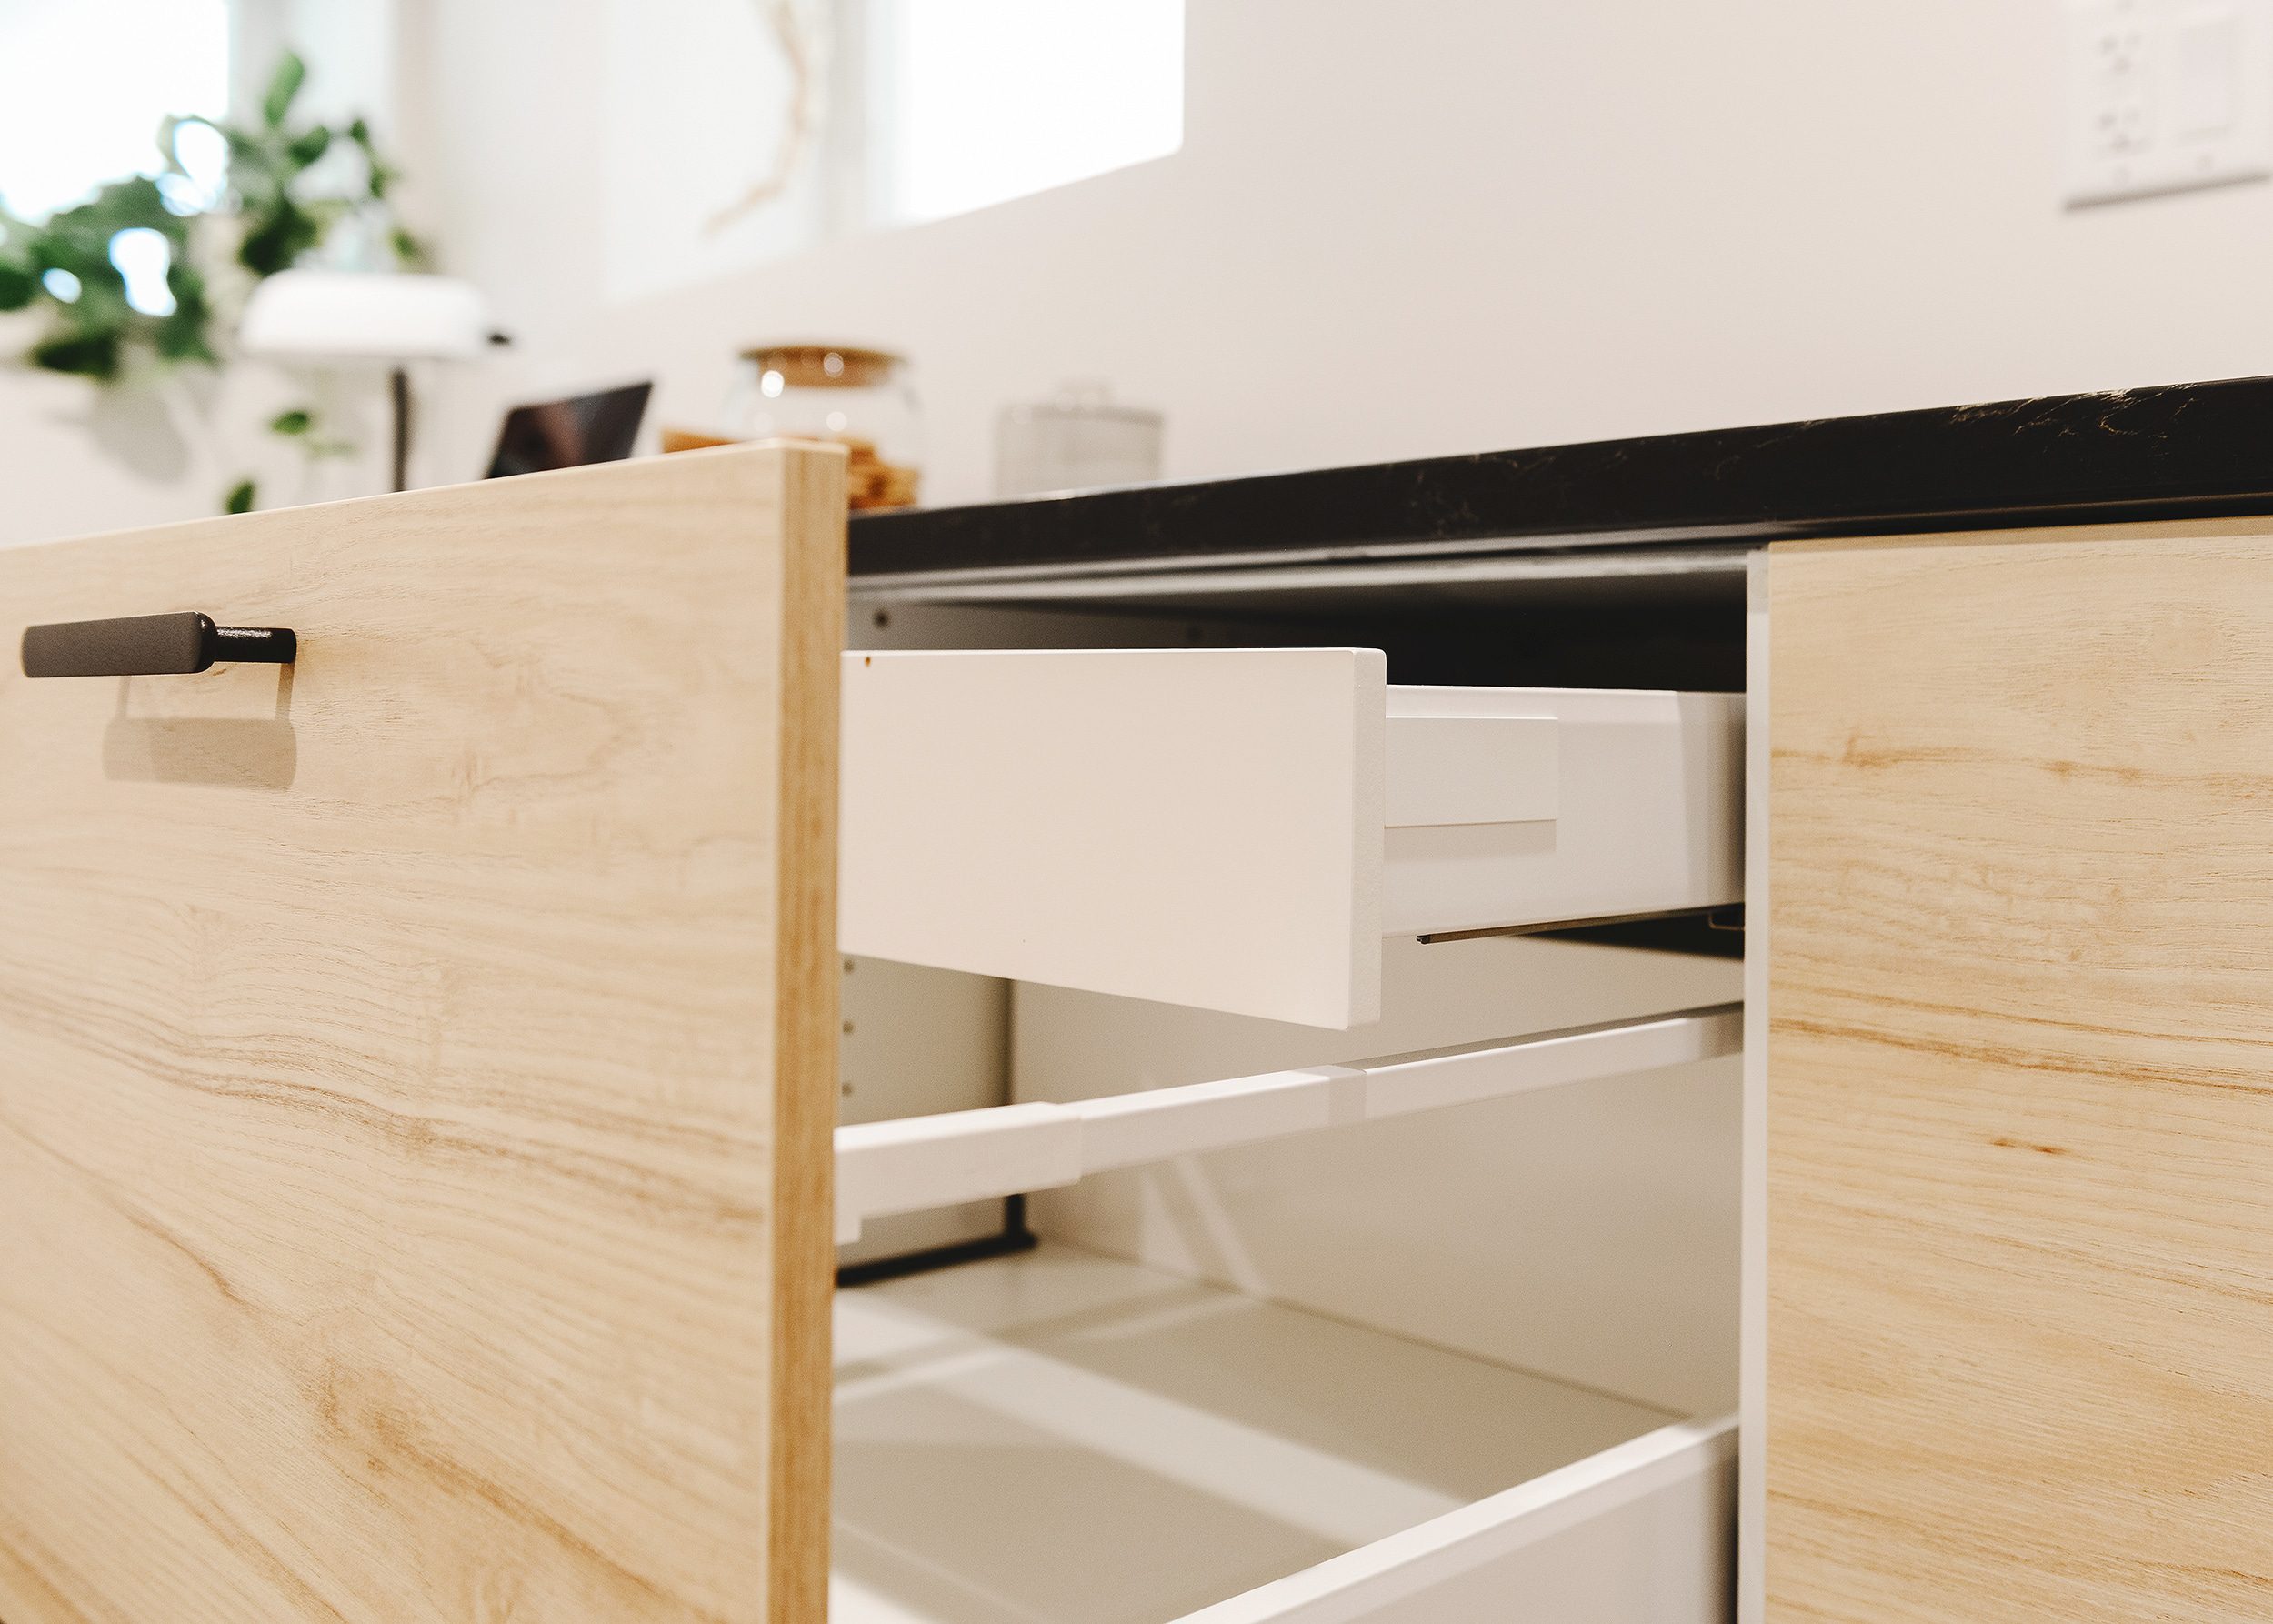 A close-up of the IKEA cabinetry with pull-out drawers | via Yellow Brick Home